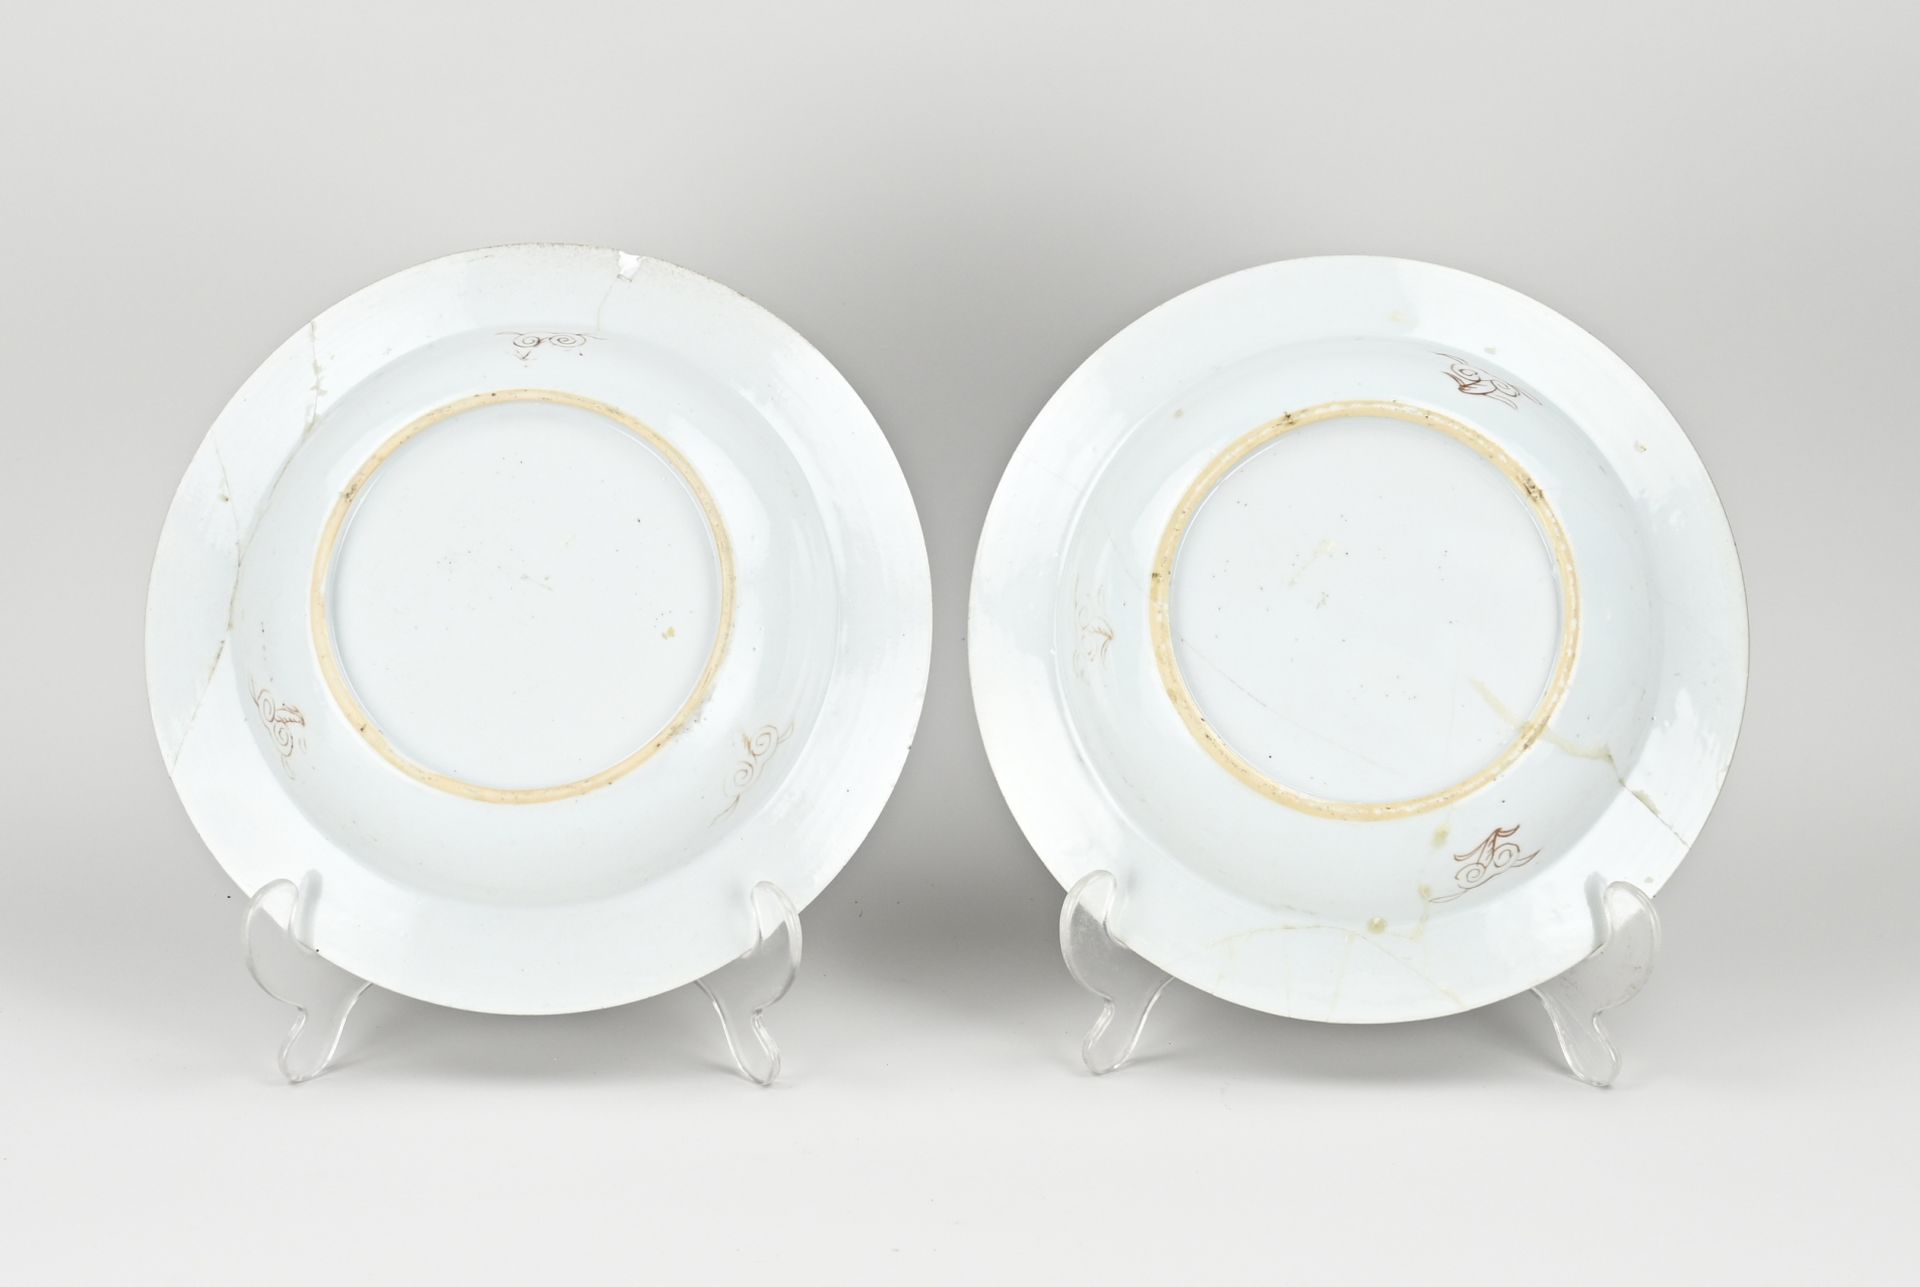 Two 18th century Chinese plates Ø 22.5 cm. - Image 2 of 2